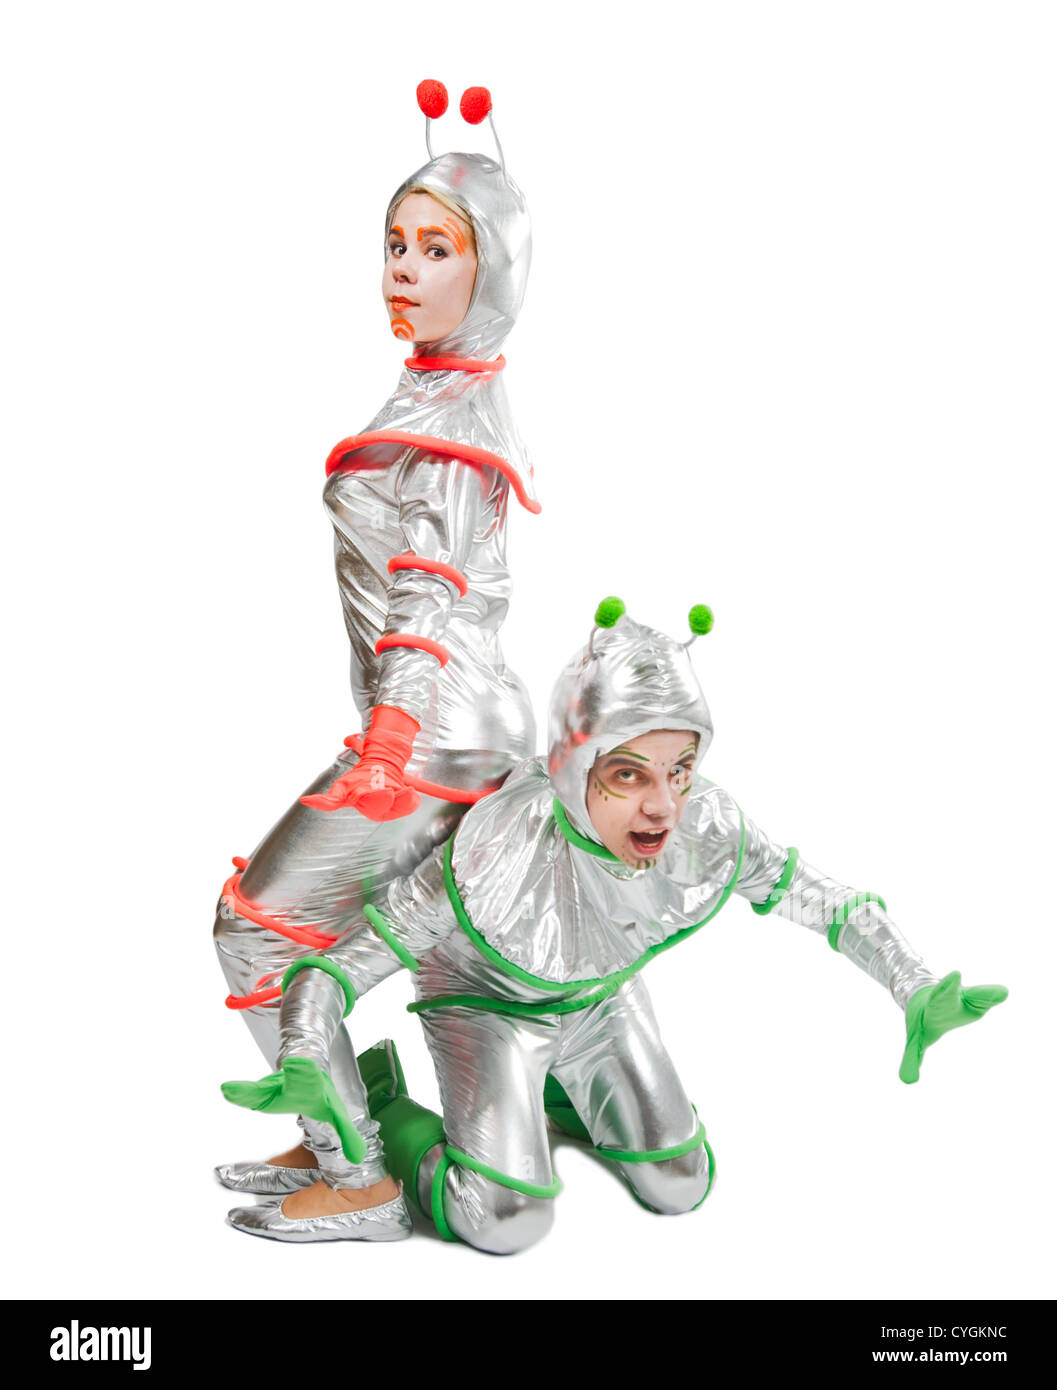 Extraterrestrial being. Aliens. Two Persons wearing costume of funny alien Stock Photo